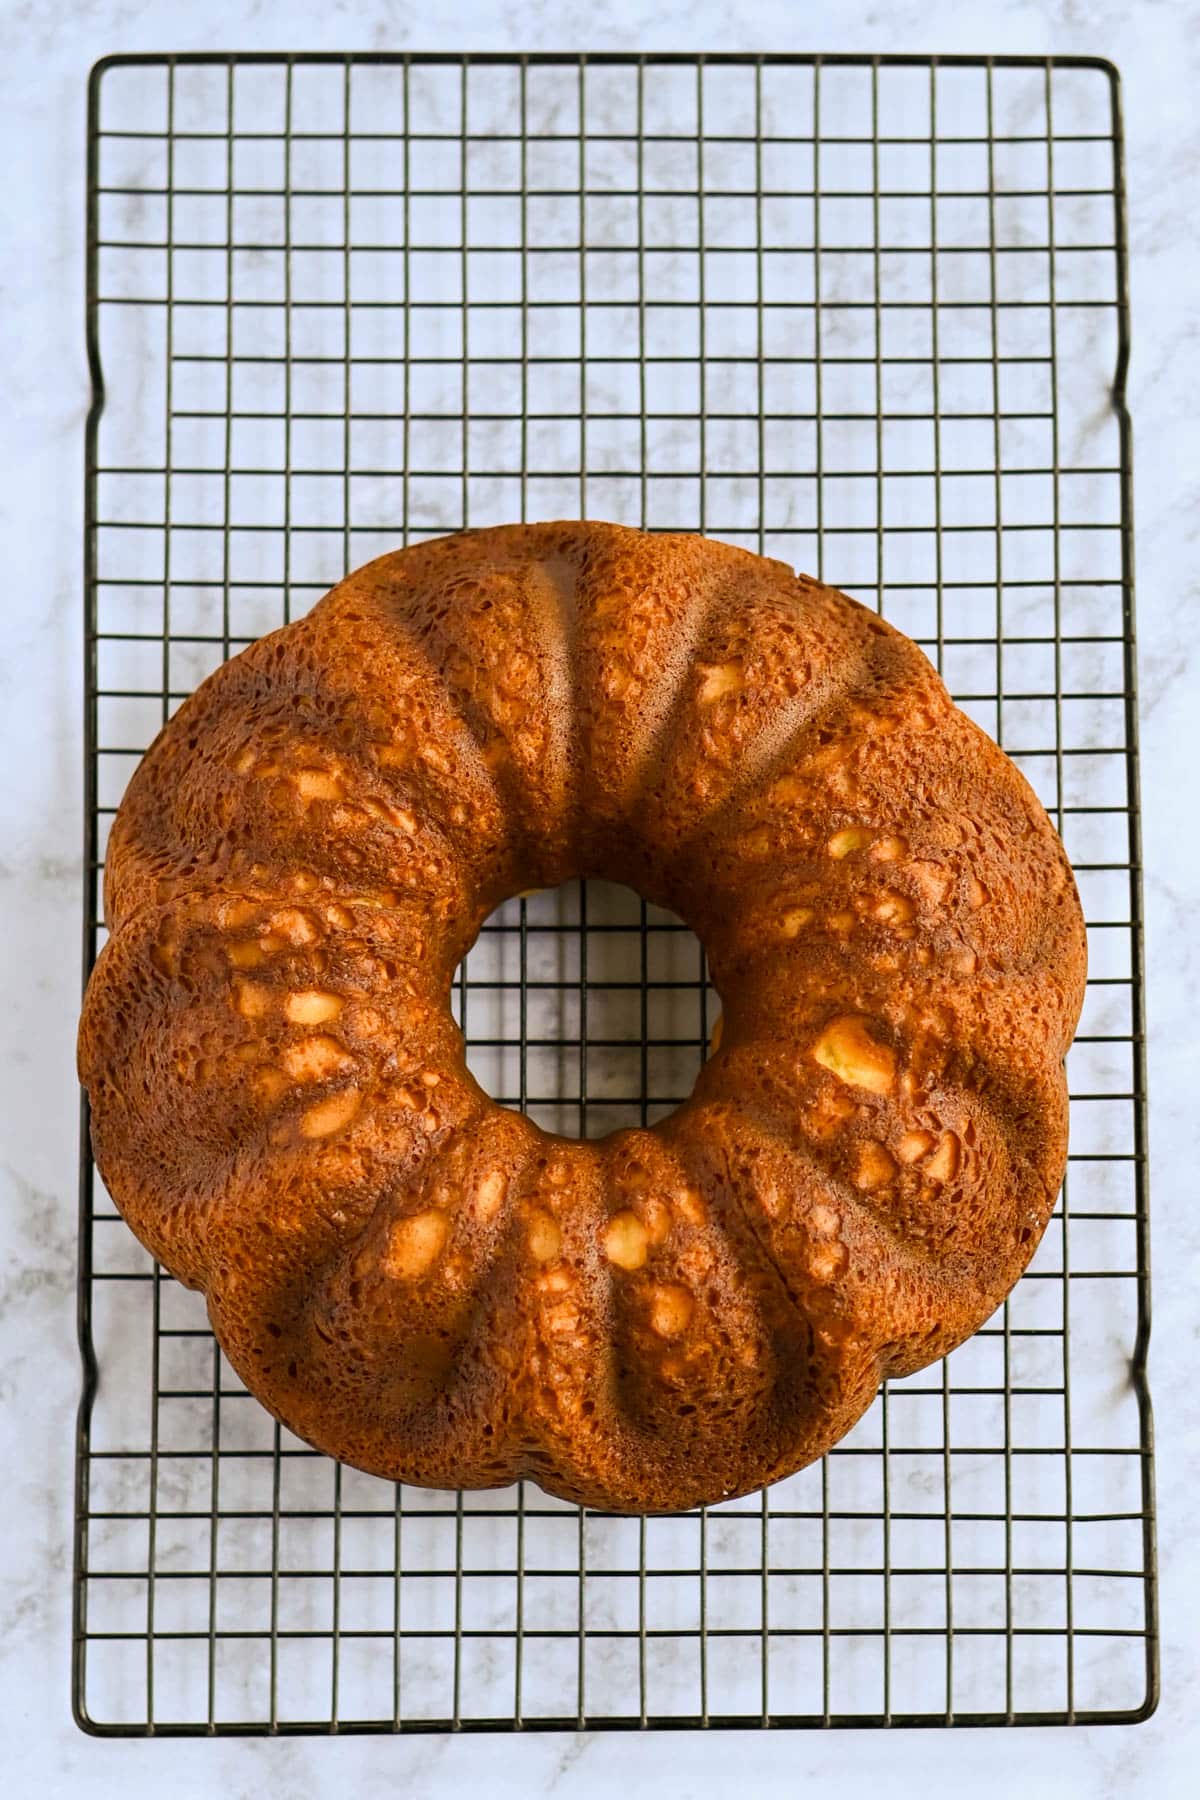 A bundt cake cooling on a wire rack on a marble countertop.